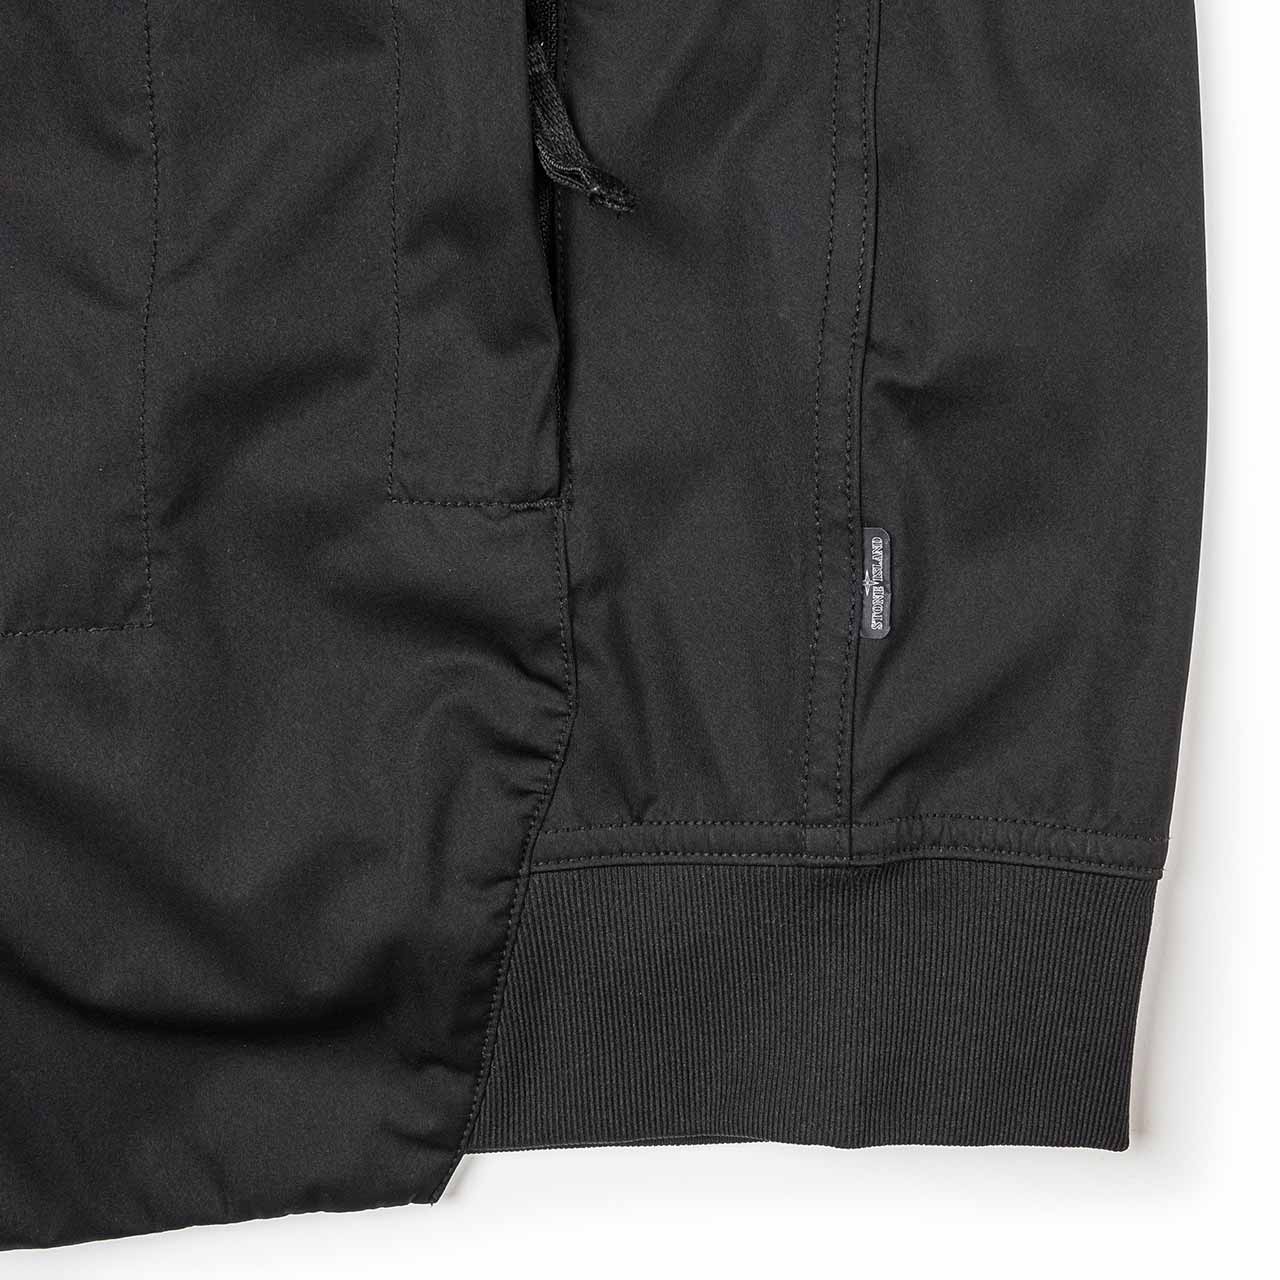 stone island shadow project packable anorak (black) - 721940504.v0029 - a.plus - Image - 6